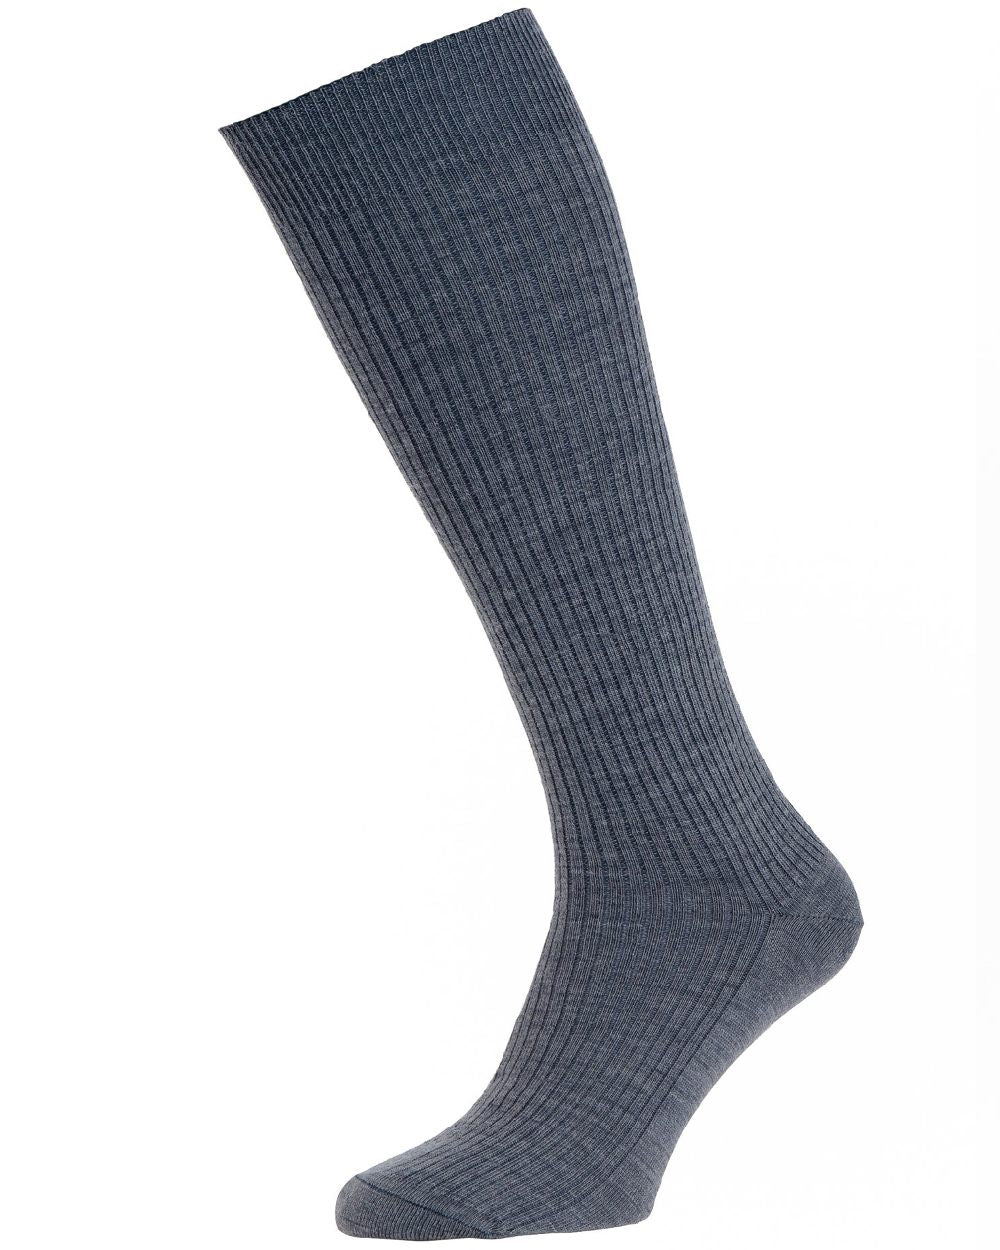 HJ Hall Wool Rich Immaculate Long Socks in Mid Grey 